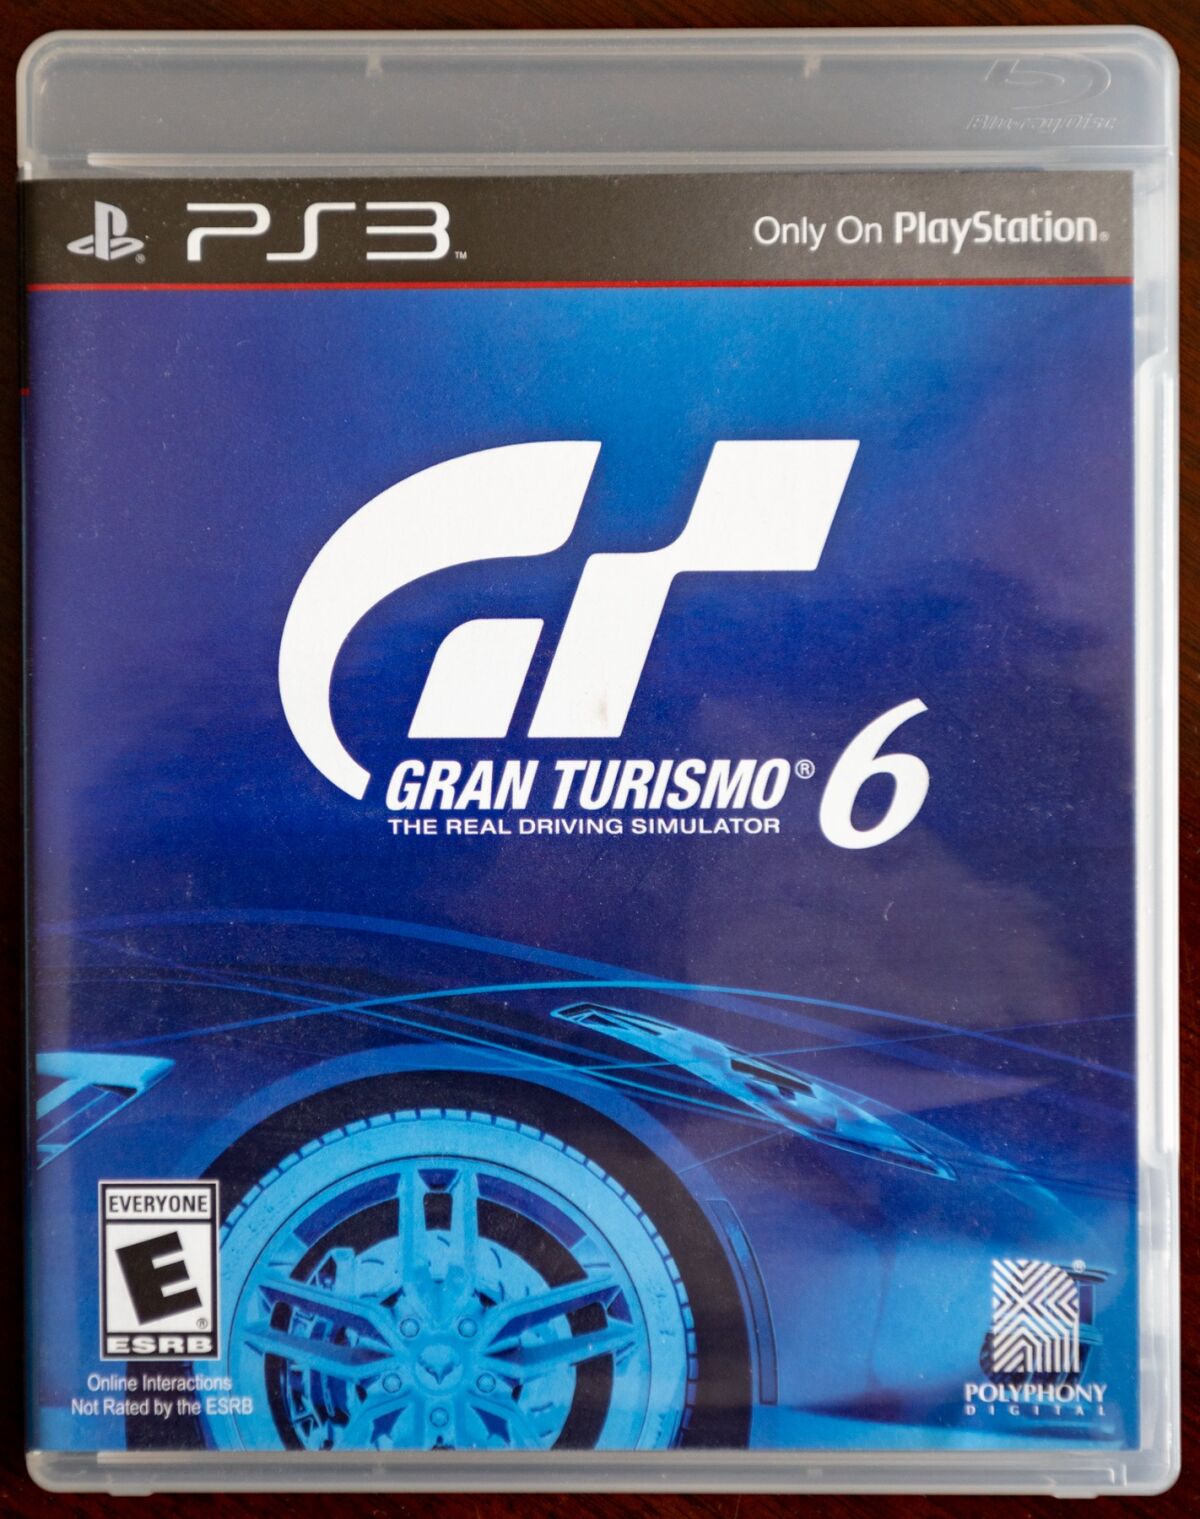 GRAN TURISMO 6 for PlayStation 3